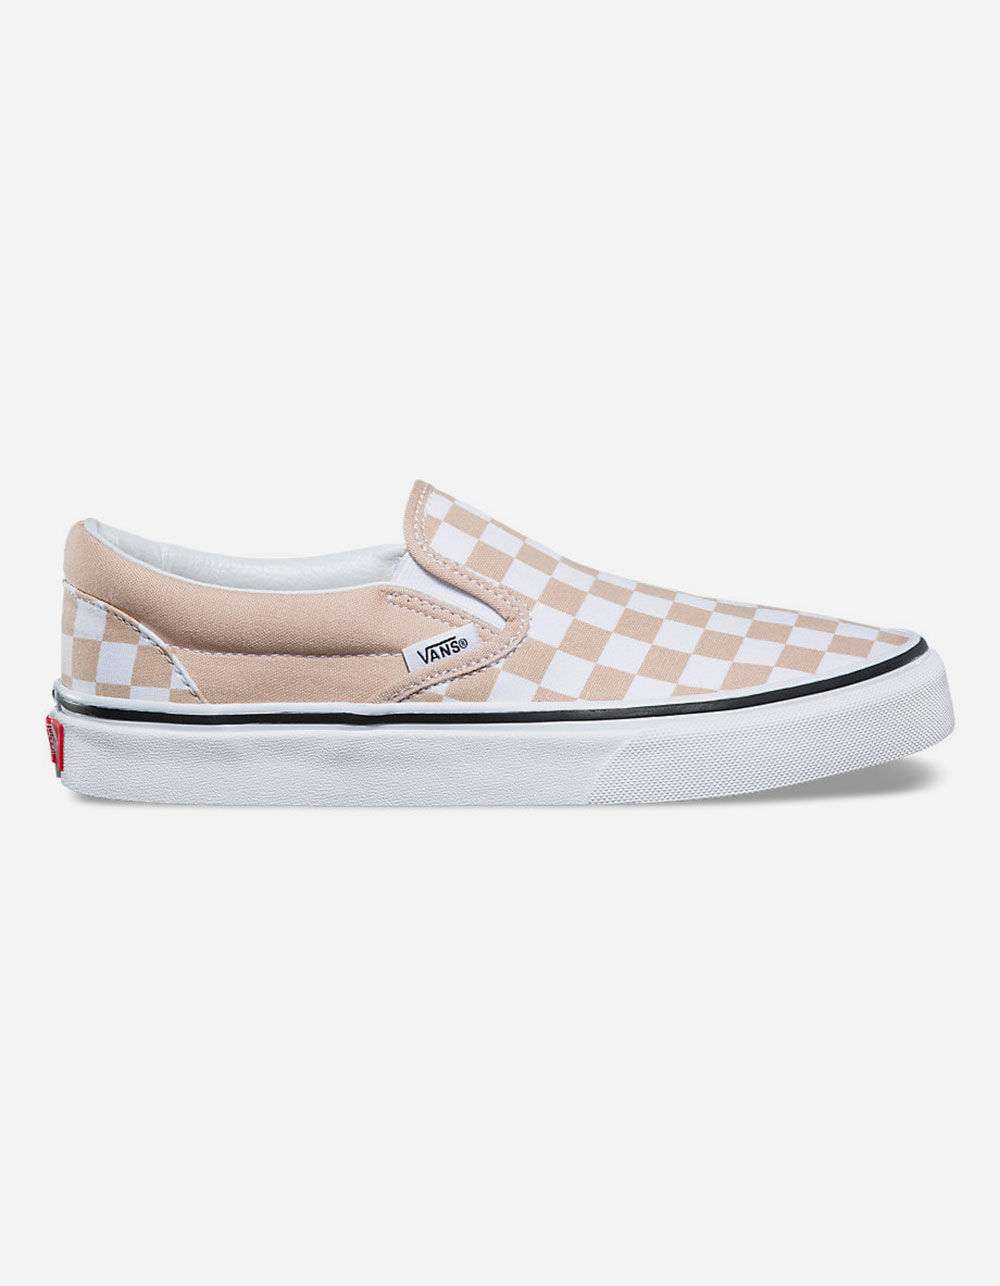 Checkerboard Vans review: a comfortable classic - Reviewed